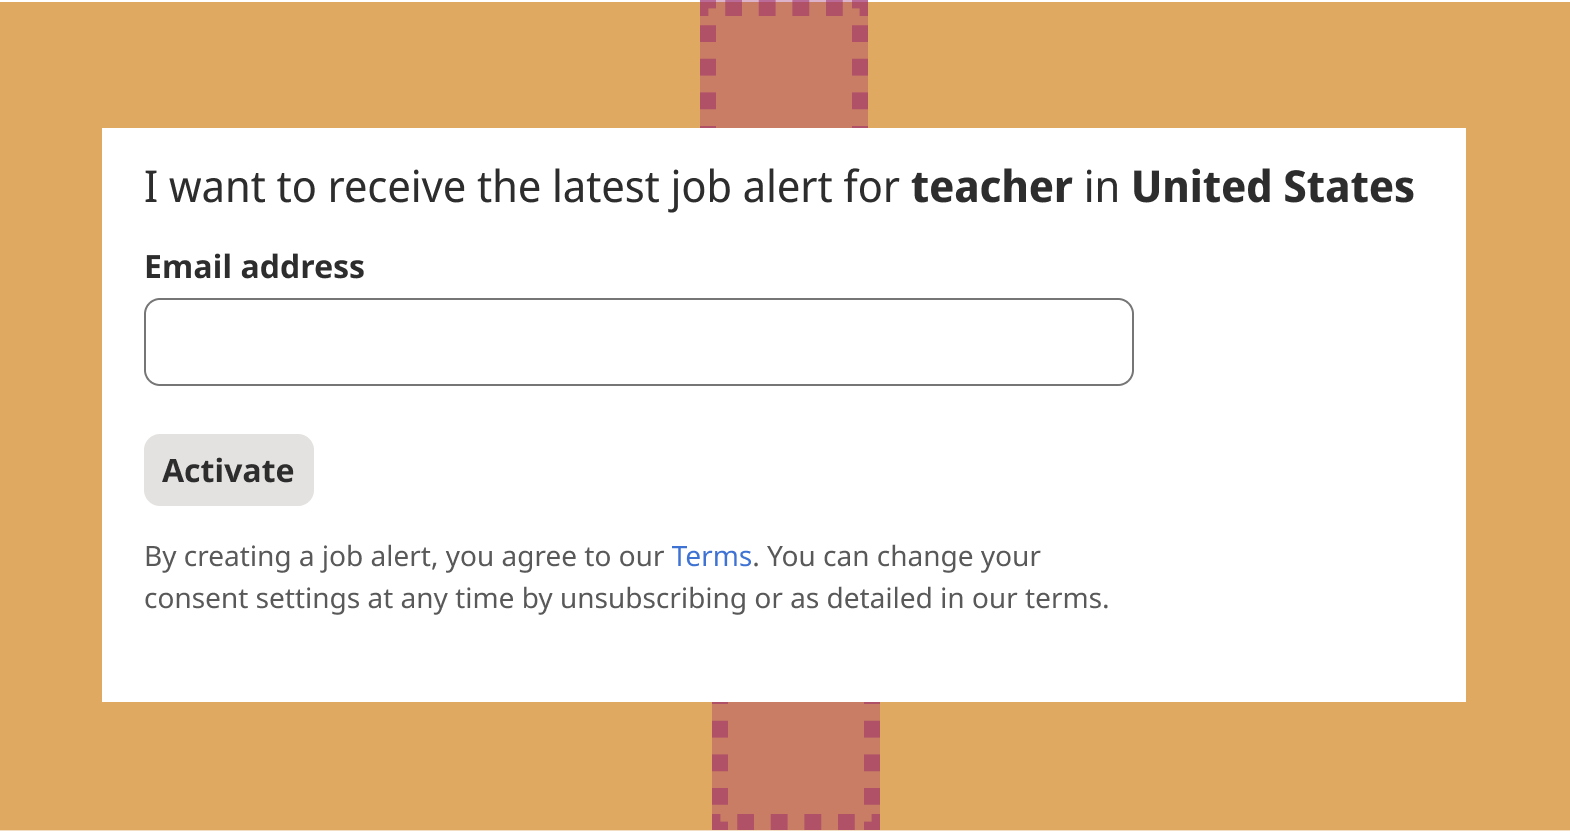 This is a text box to enter email address and activate job alert.